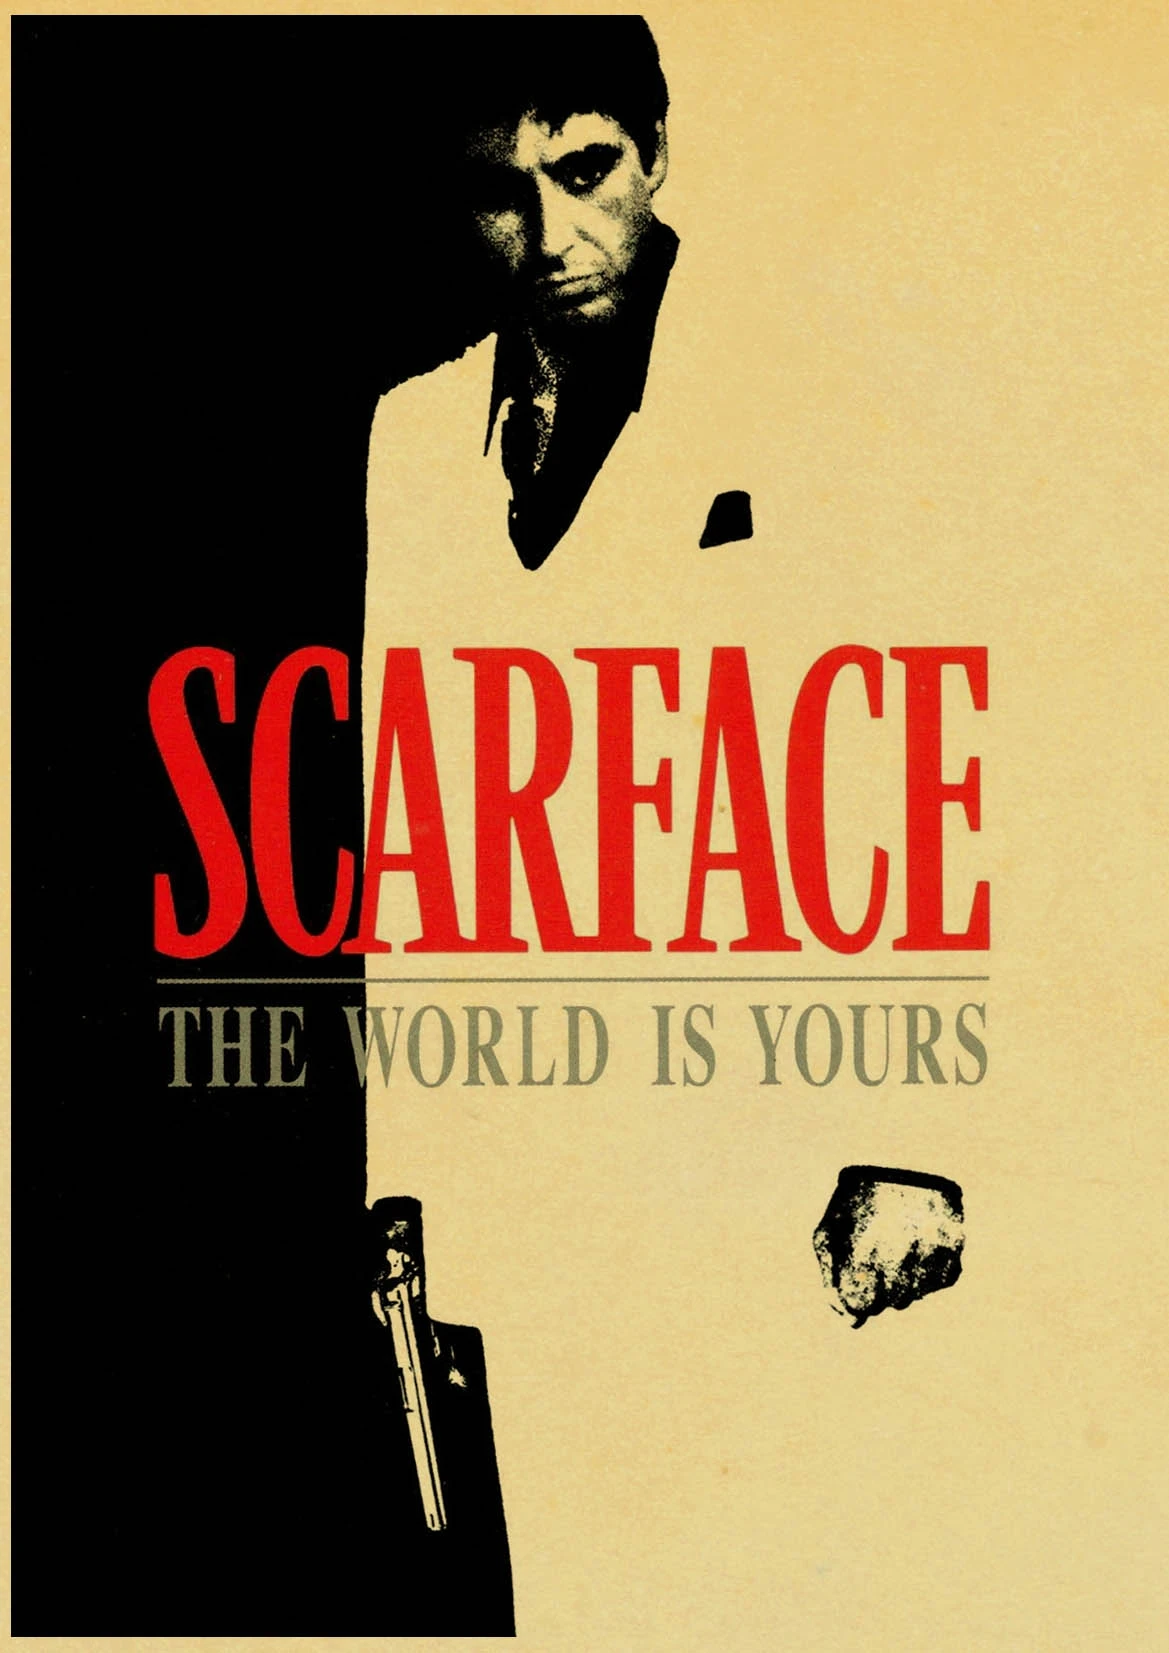 

Scarface Movie Posters Good Quality Painting Vintage Poster Kraft Paper For Home Bar Wall Decor/Stickers Painting